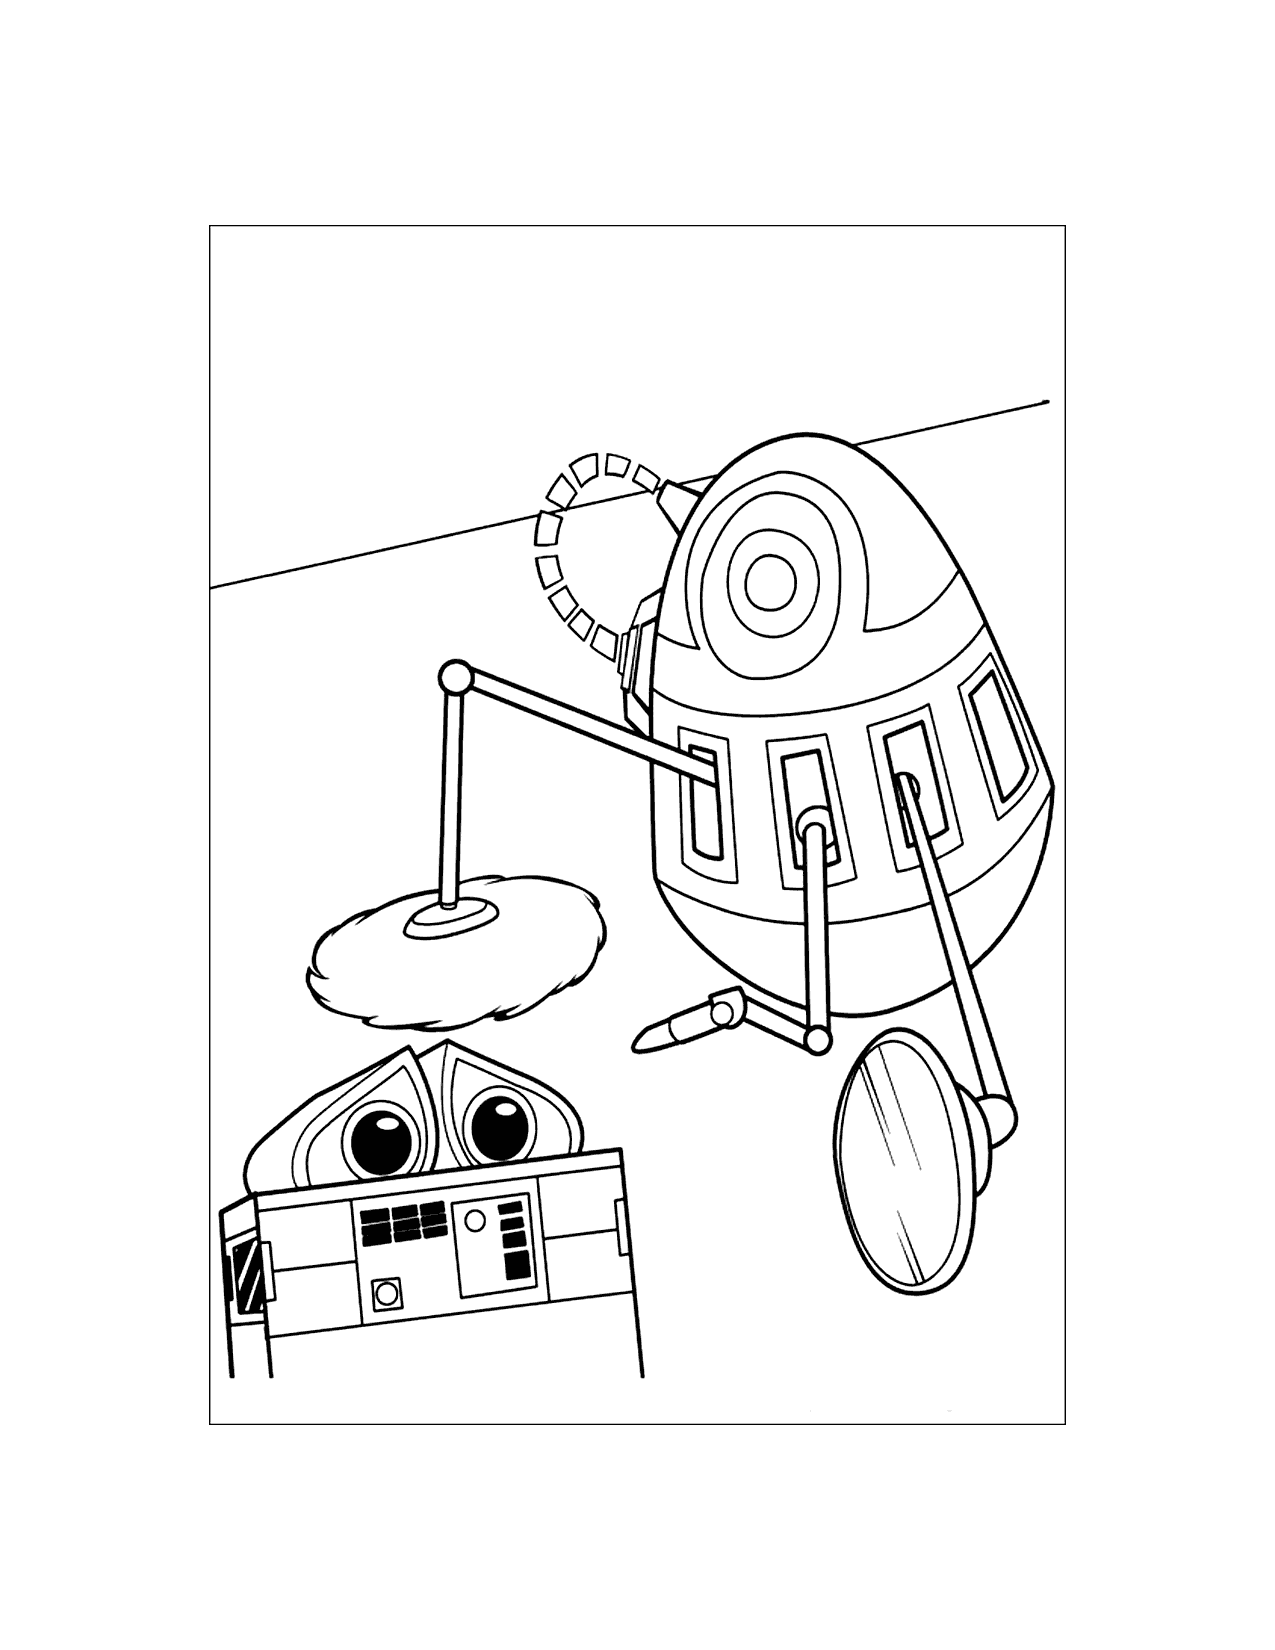 Wall E Needs A Cleaning Coloring Page